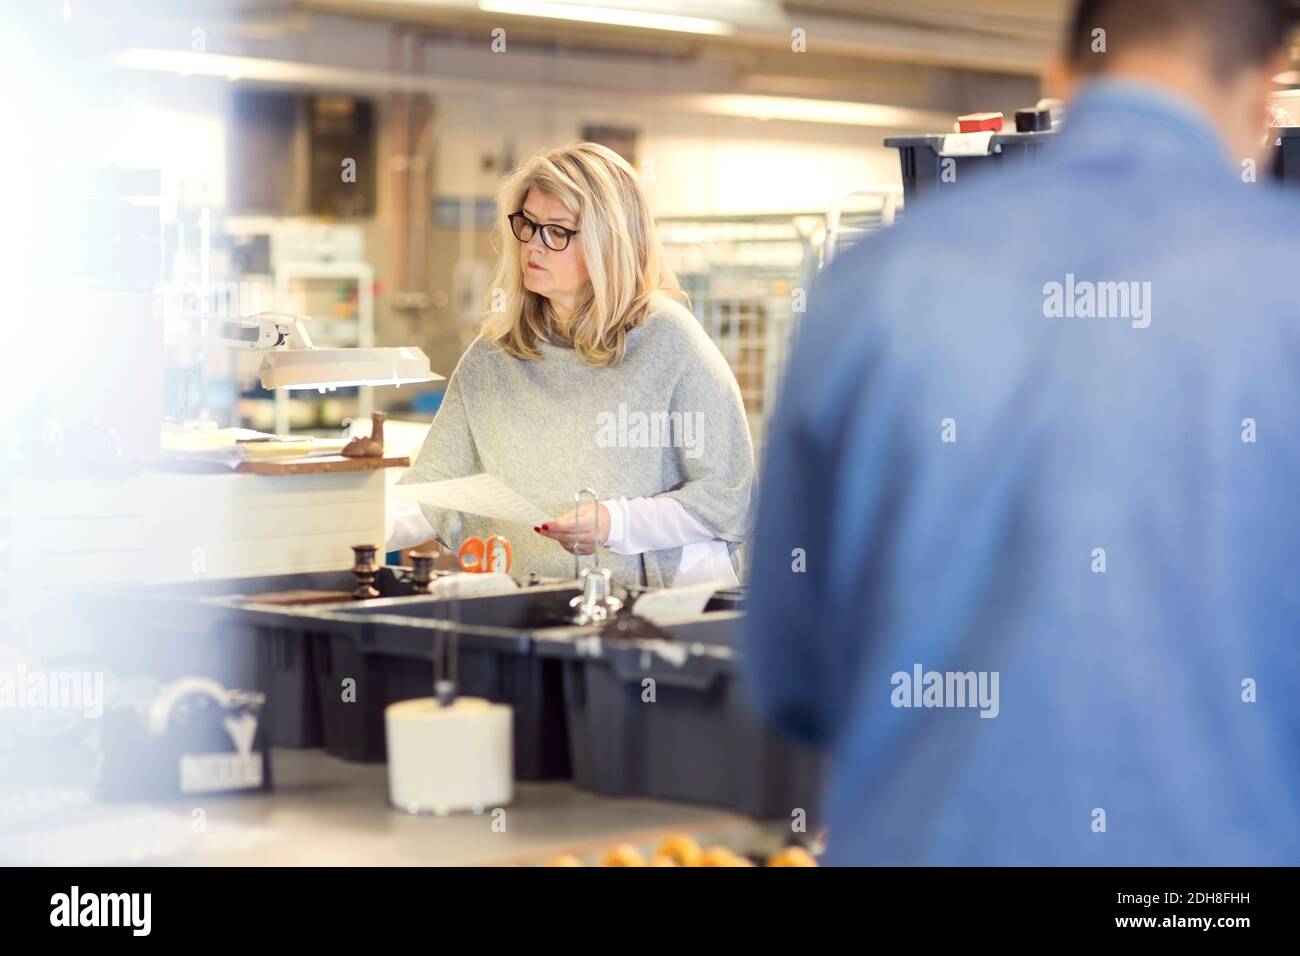 Woman reading paper while volunteer standing by production line at workshop Stock Photo